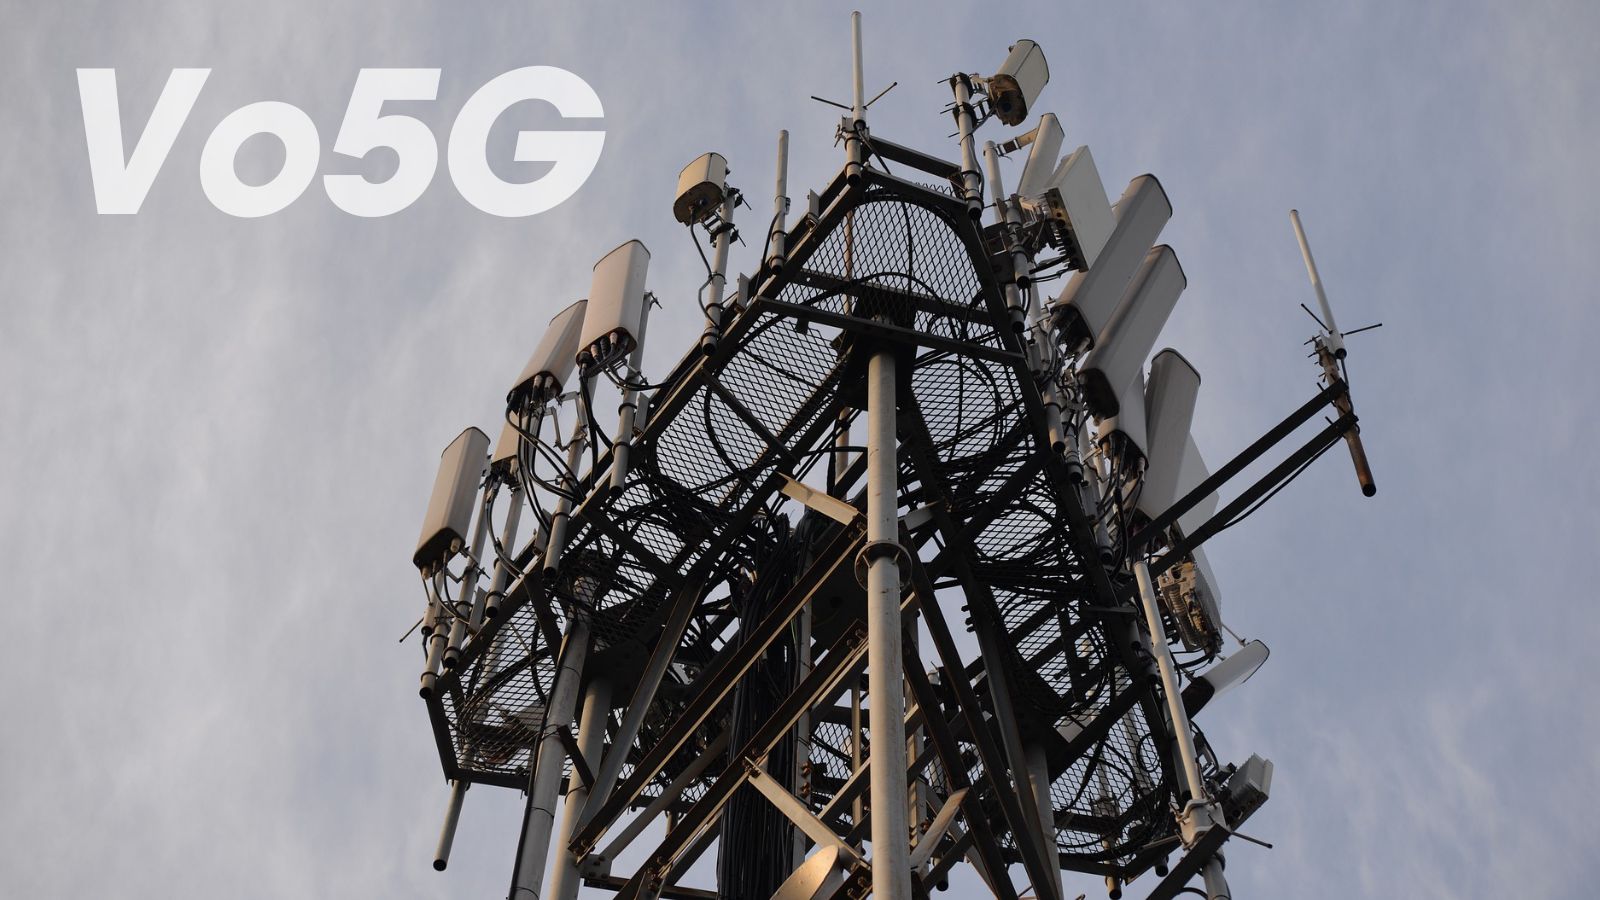 Move over VoLTE, it's Vo5G time: How it works and when's India getting it |  Technology News - The Indian Express